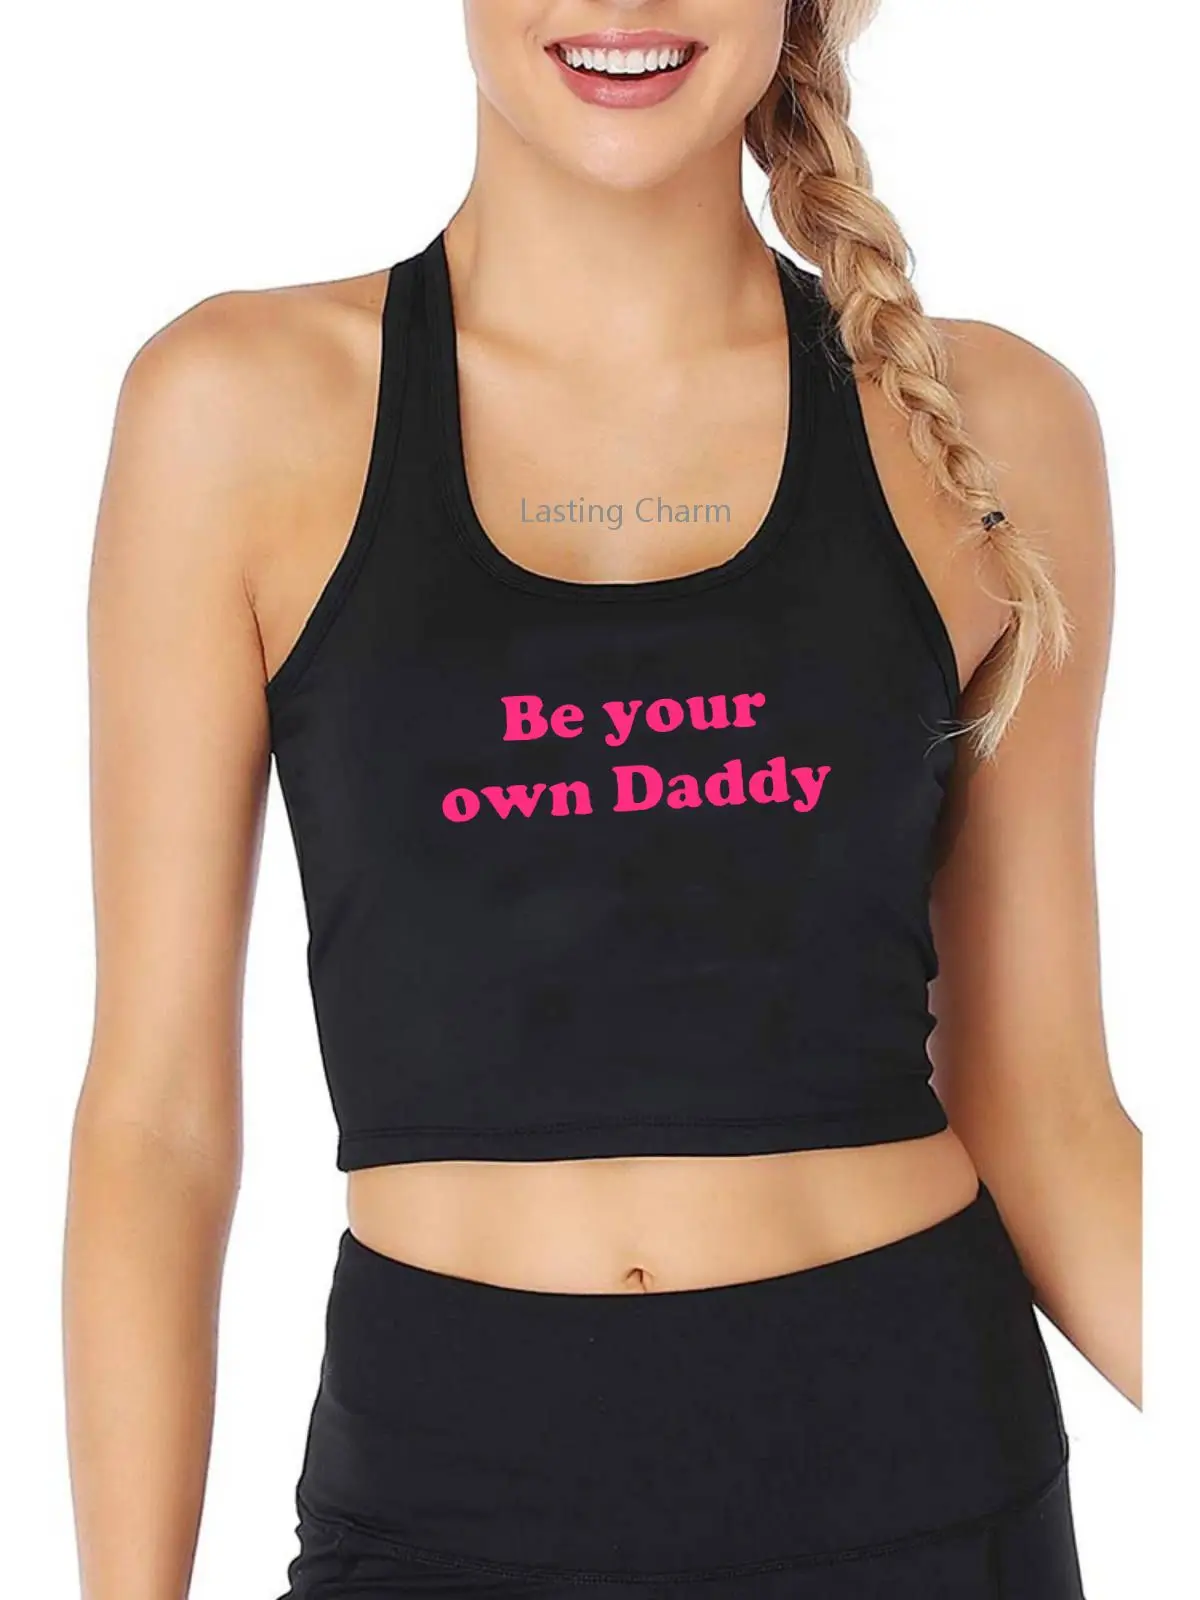 

Be Your Own Daddy Pattern Adult Humor Fun Flirty Print Tank Top Women's Yoga Sports Workout Breathable Crop Tops Gym Vest